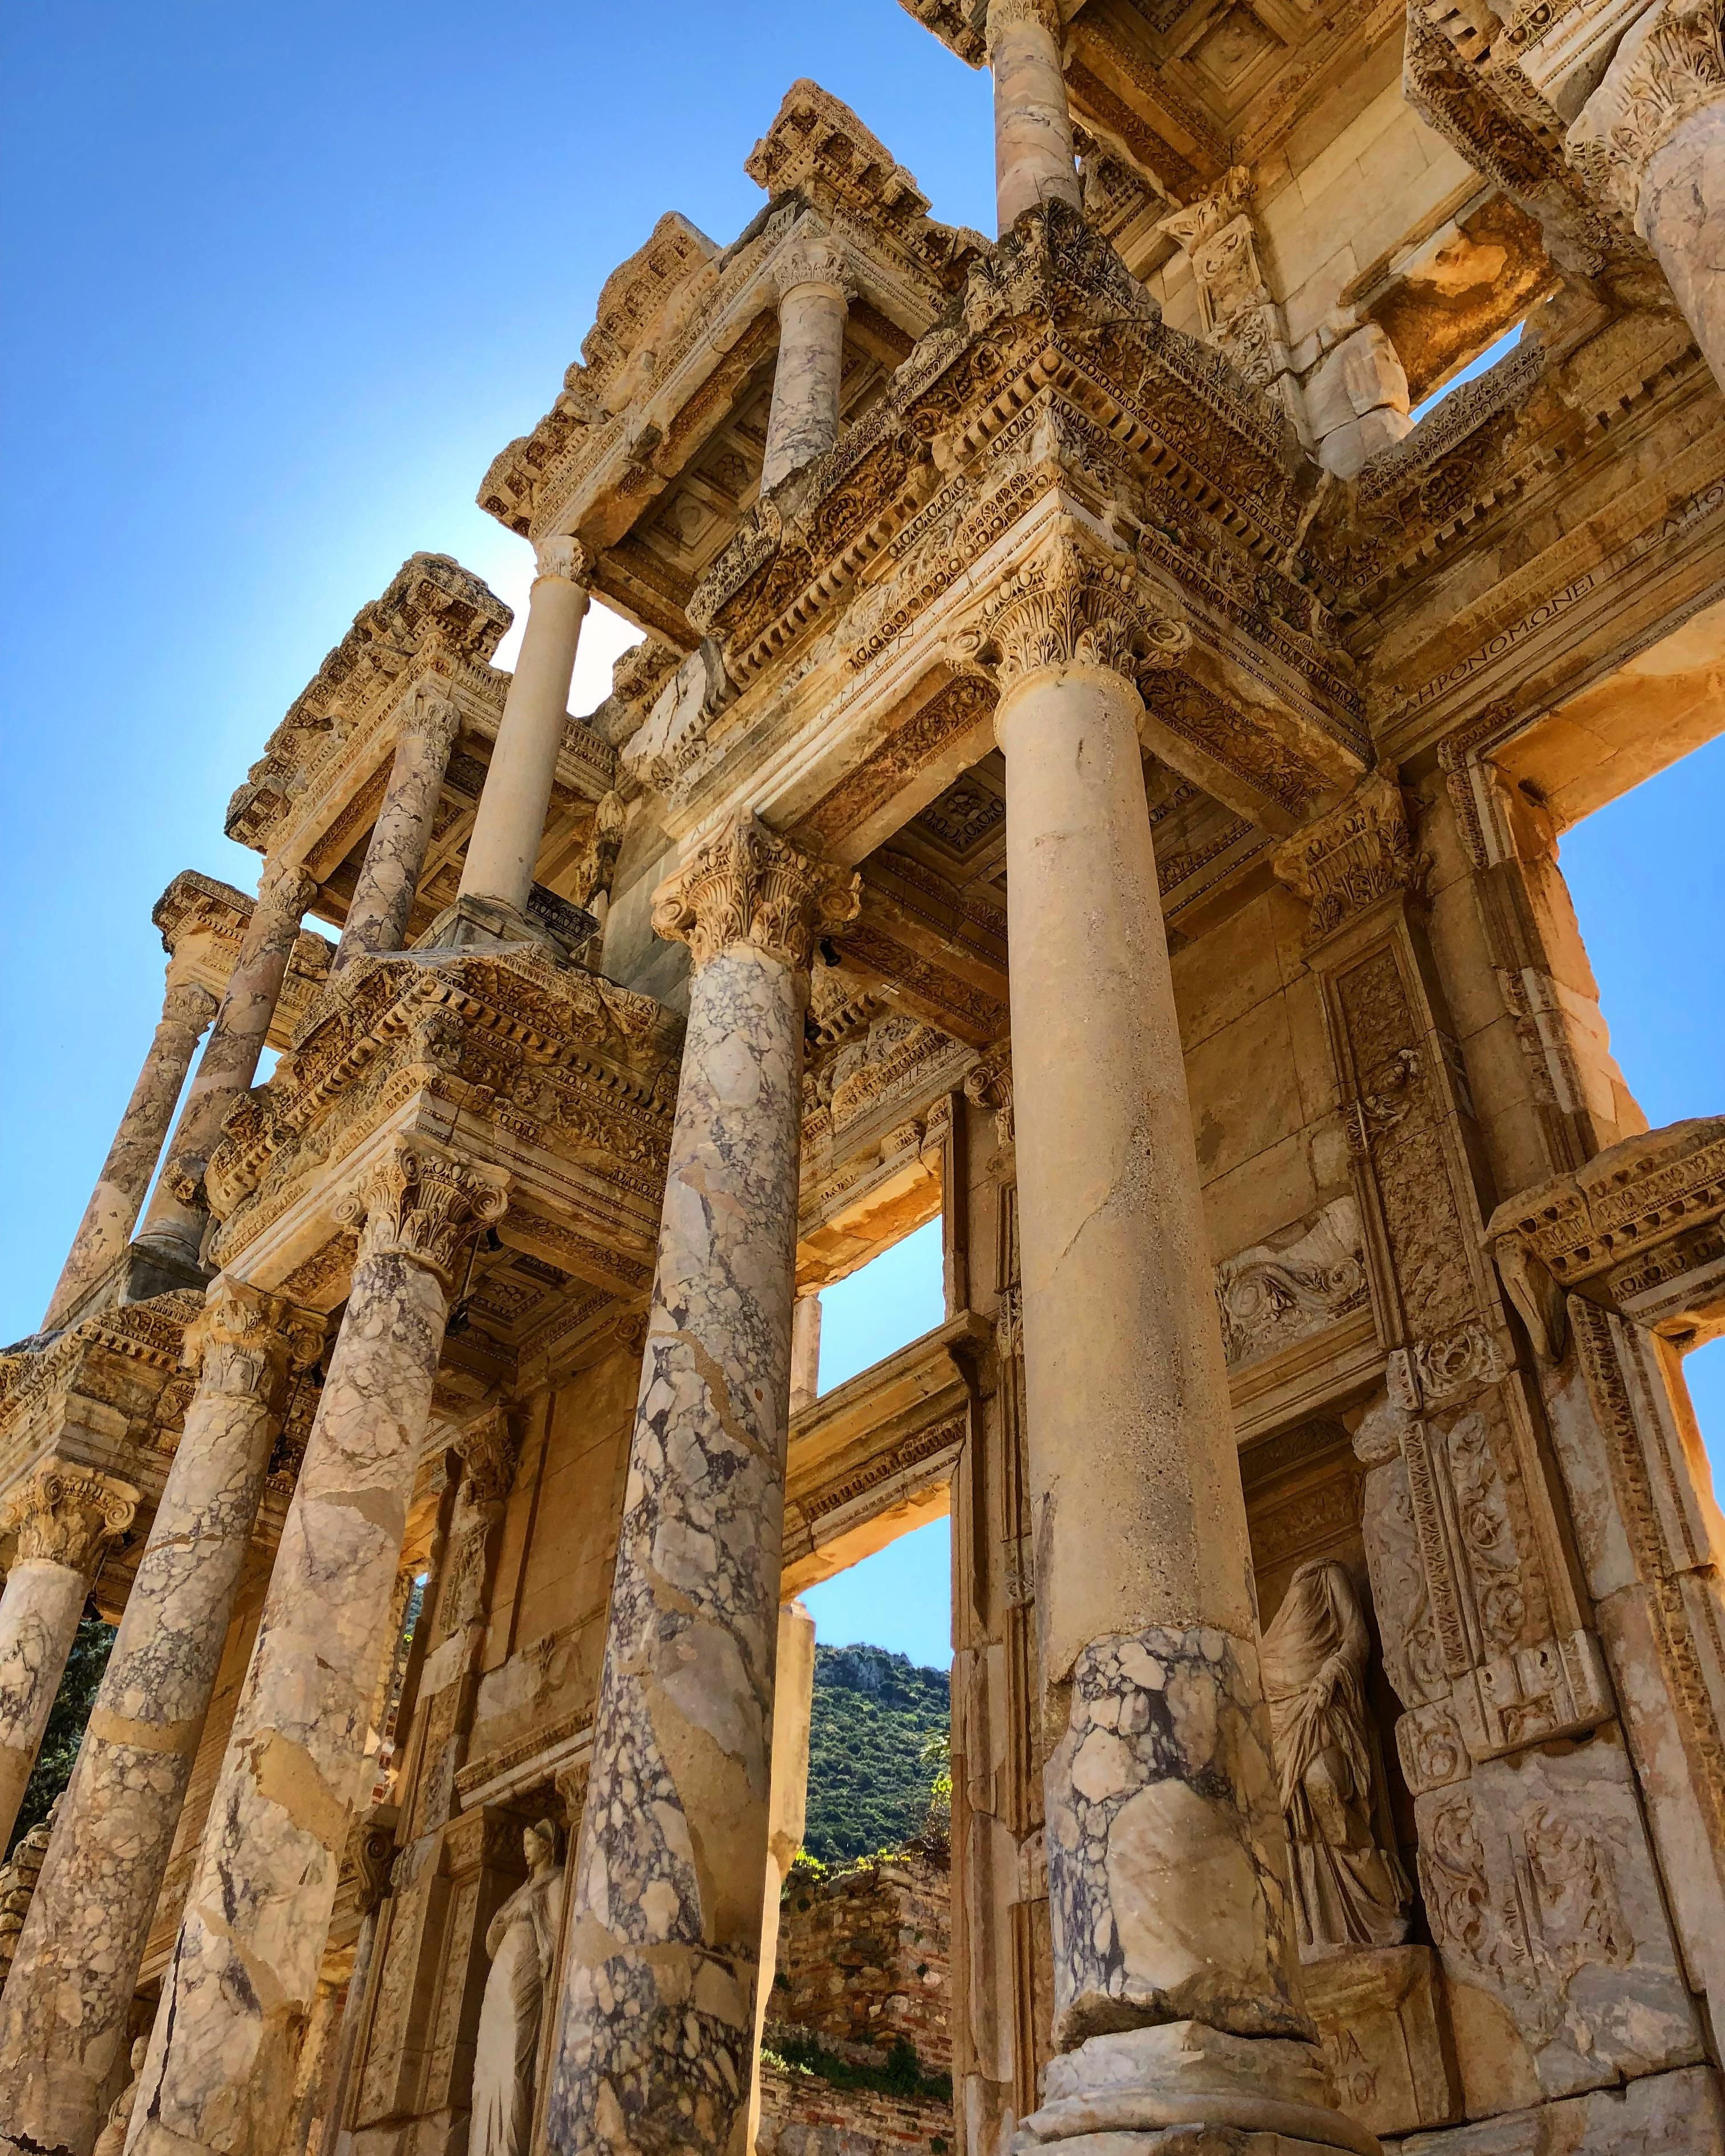 A picture I took of the Celsus Library in Efes(Ephesus) Turkey a year ago. Beautiful nature scenes, Ephesus, Ancient architecture